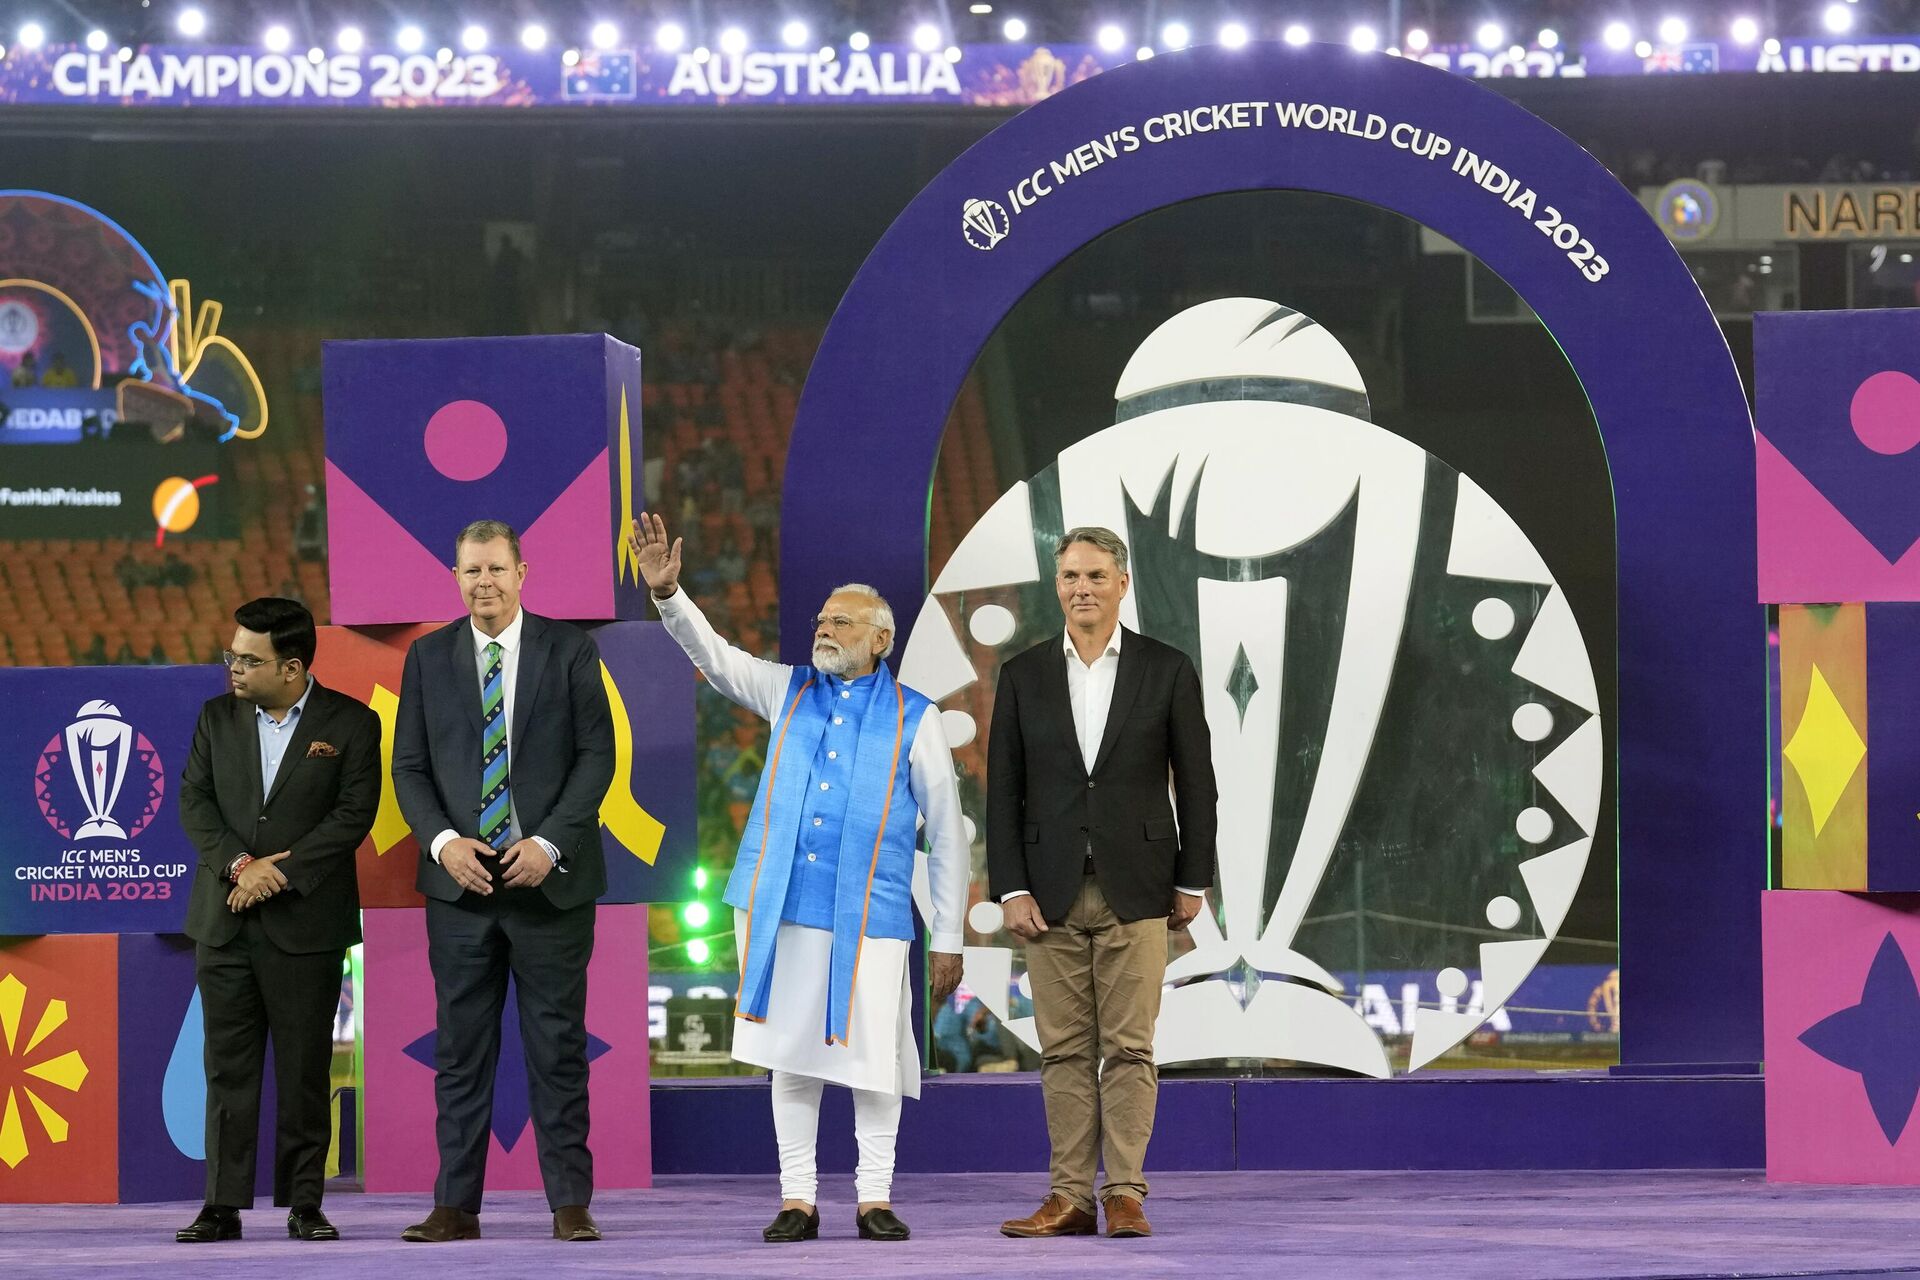 Indian Prime Minister Narendra Modi waves at the crowd standing next to Australian Deputy Prime Minister Richard Marles, right, after Australia won the ICC Men's Cricket World Cup final match against India - Sputnik India, 1920, 20.11.2023